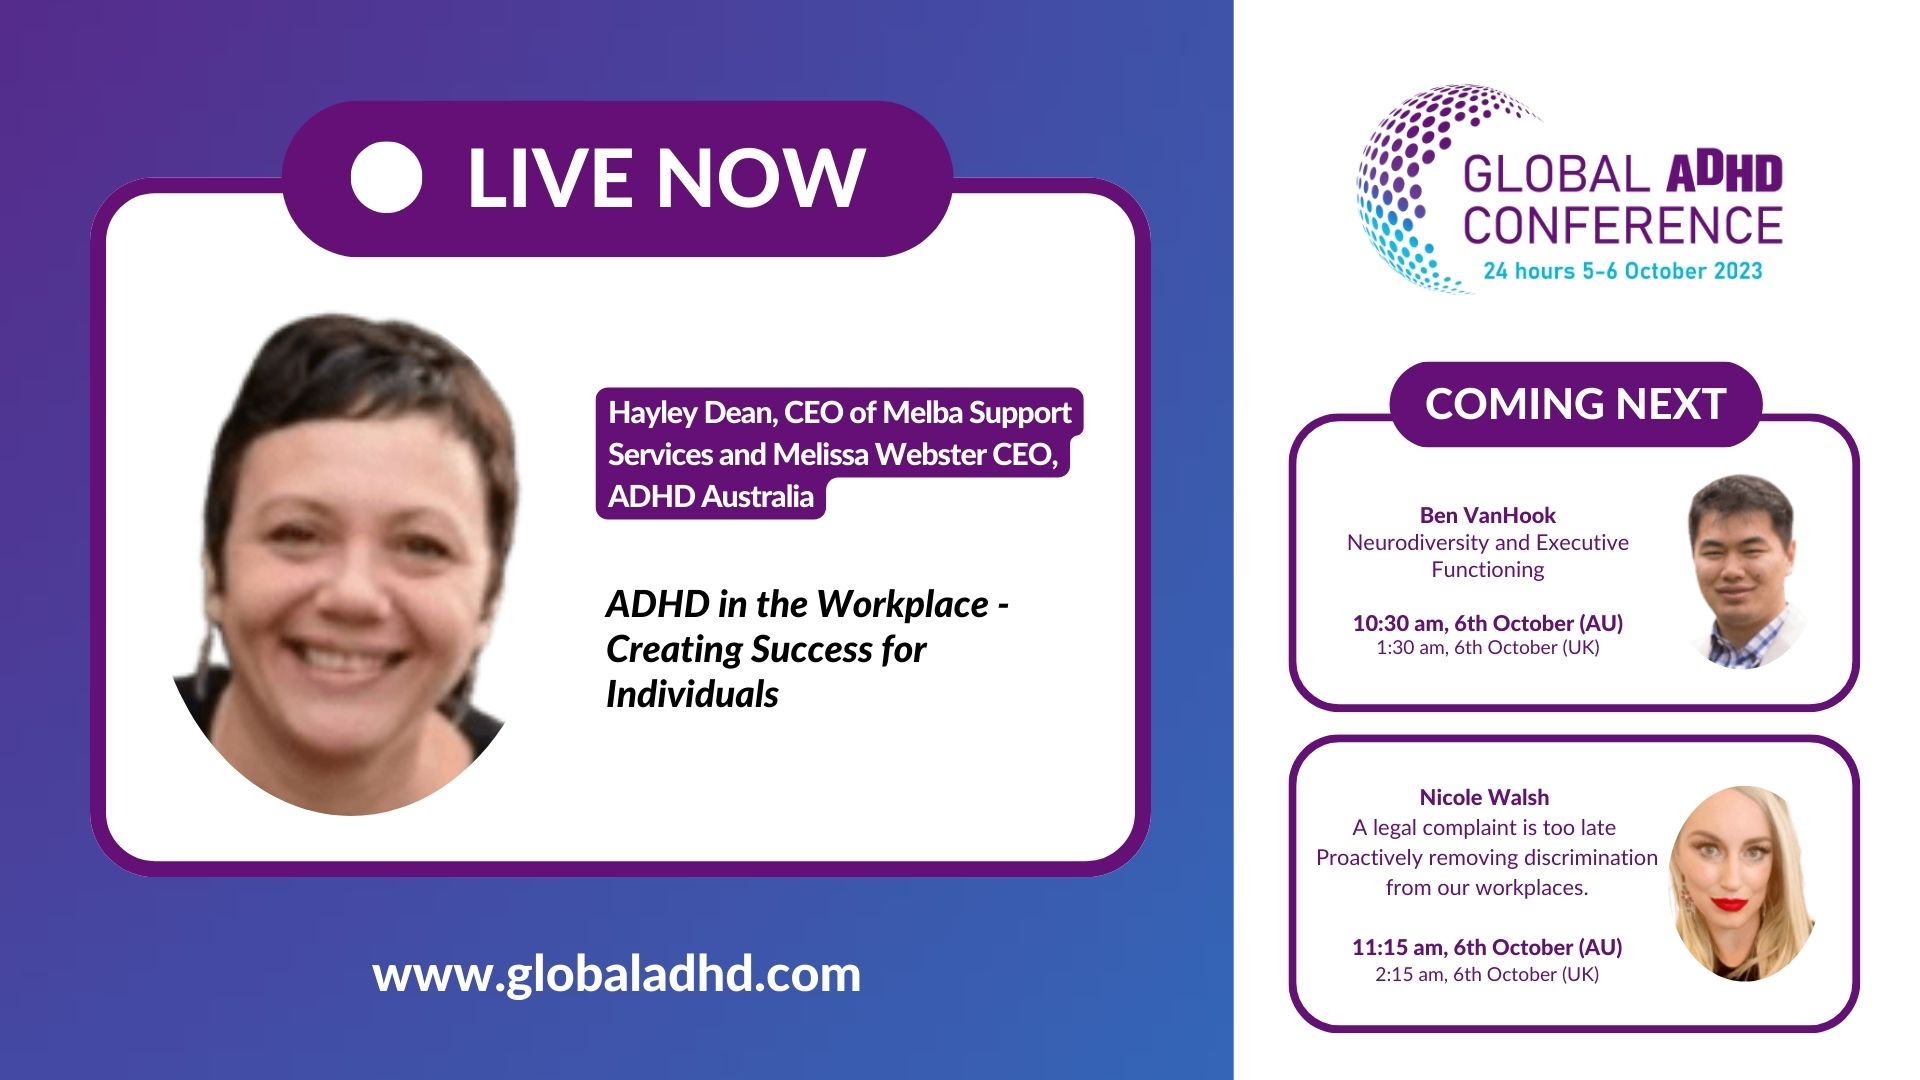 ADHD in the Workplace - Creating Success for Individuals by Hayley Dean